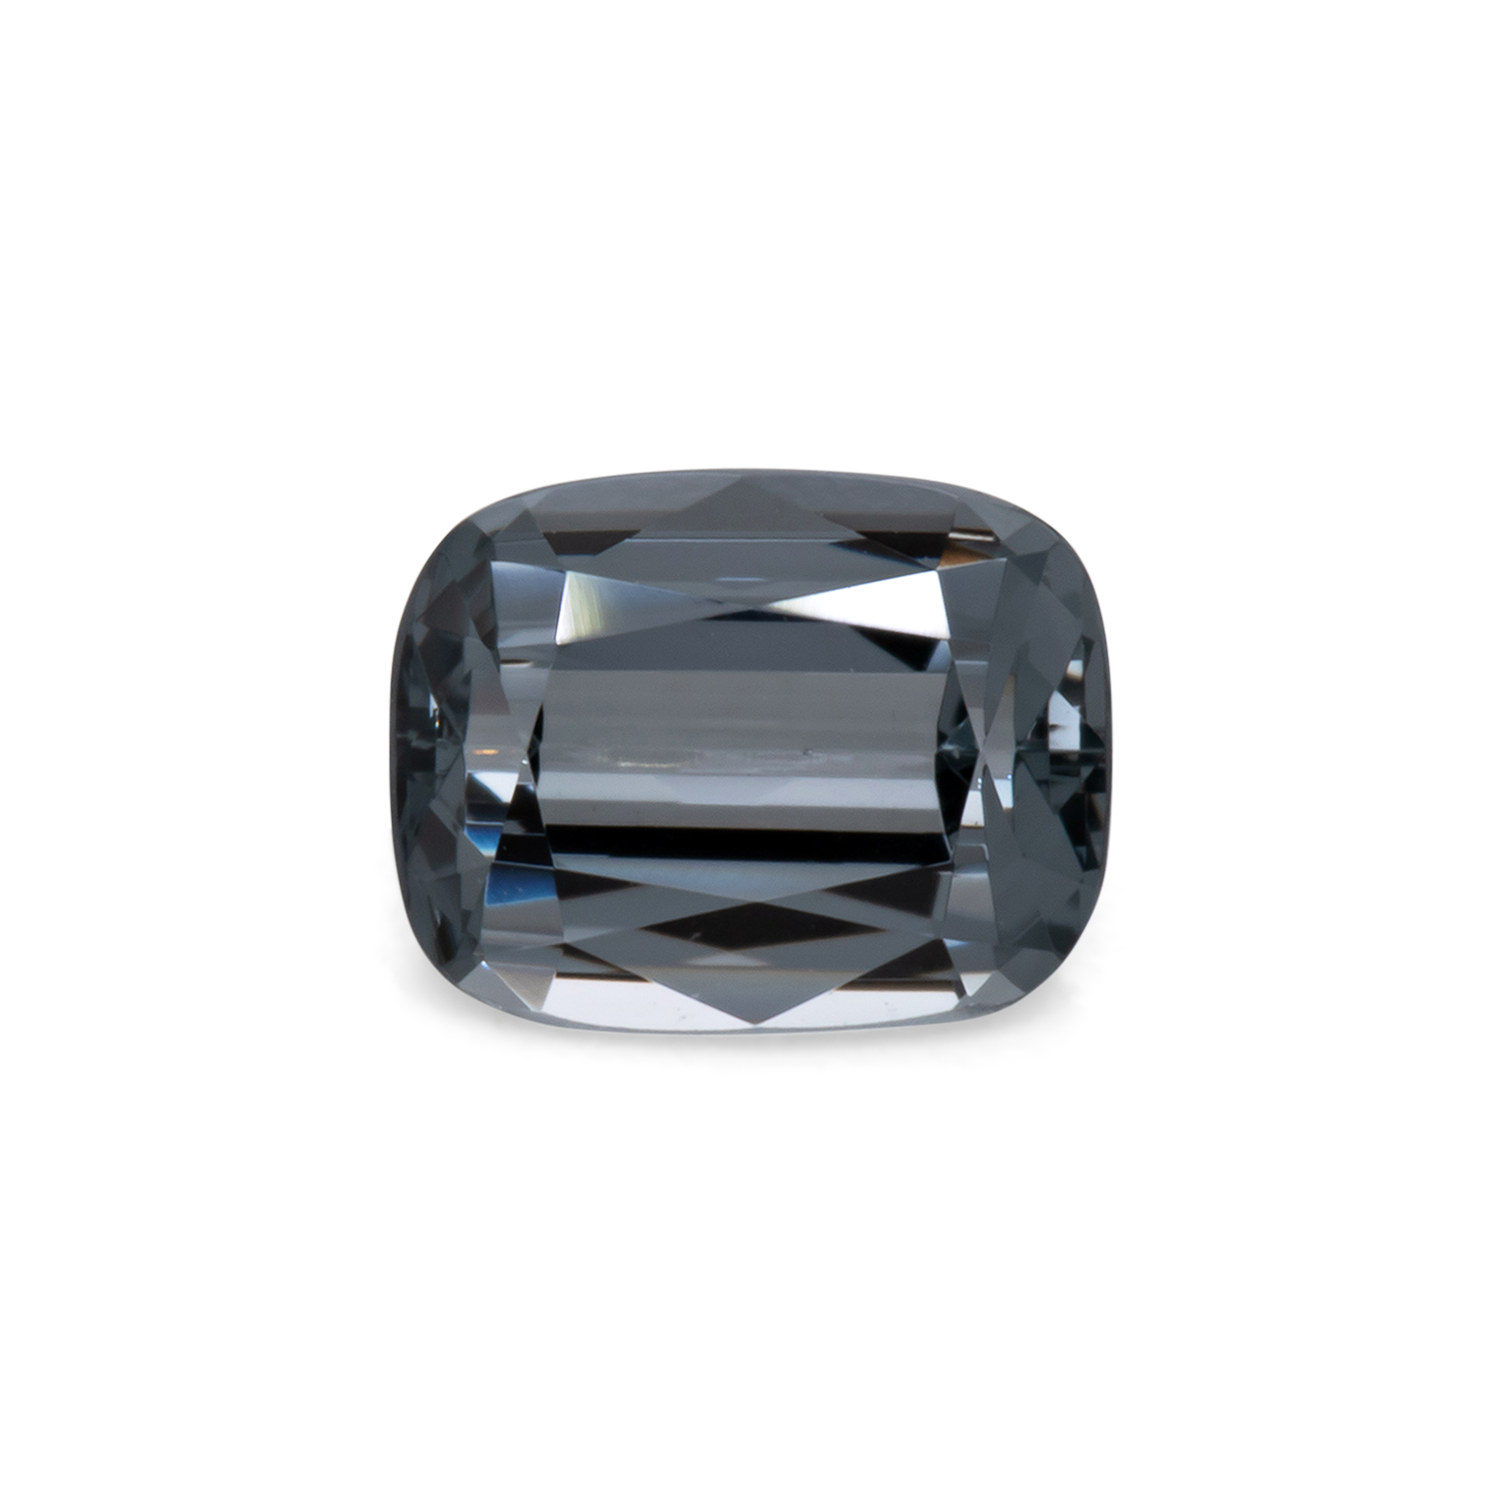 Spinel - grey, cushion, 6.6x5.1 mm, 1.00 cts, No. SP90058